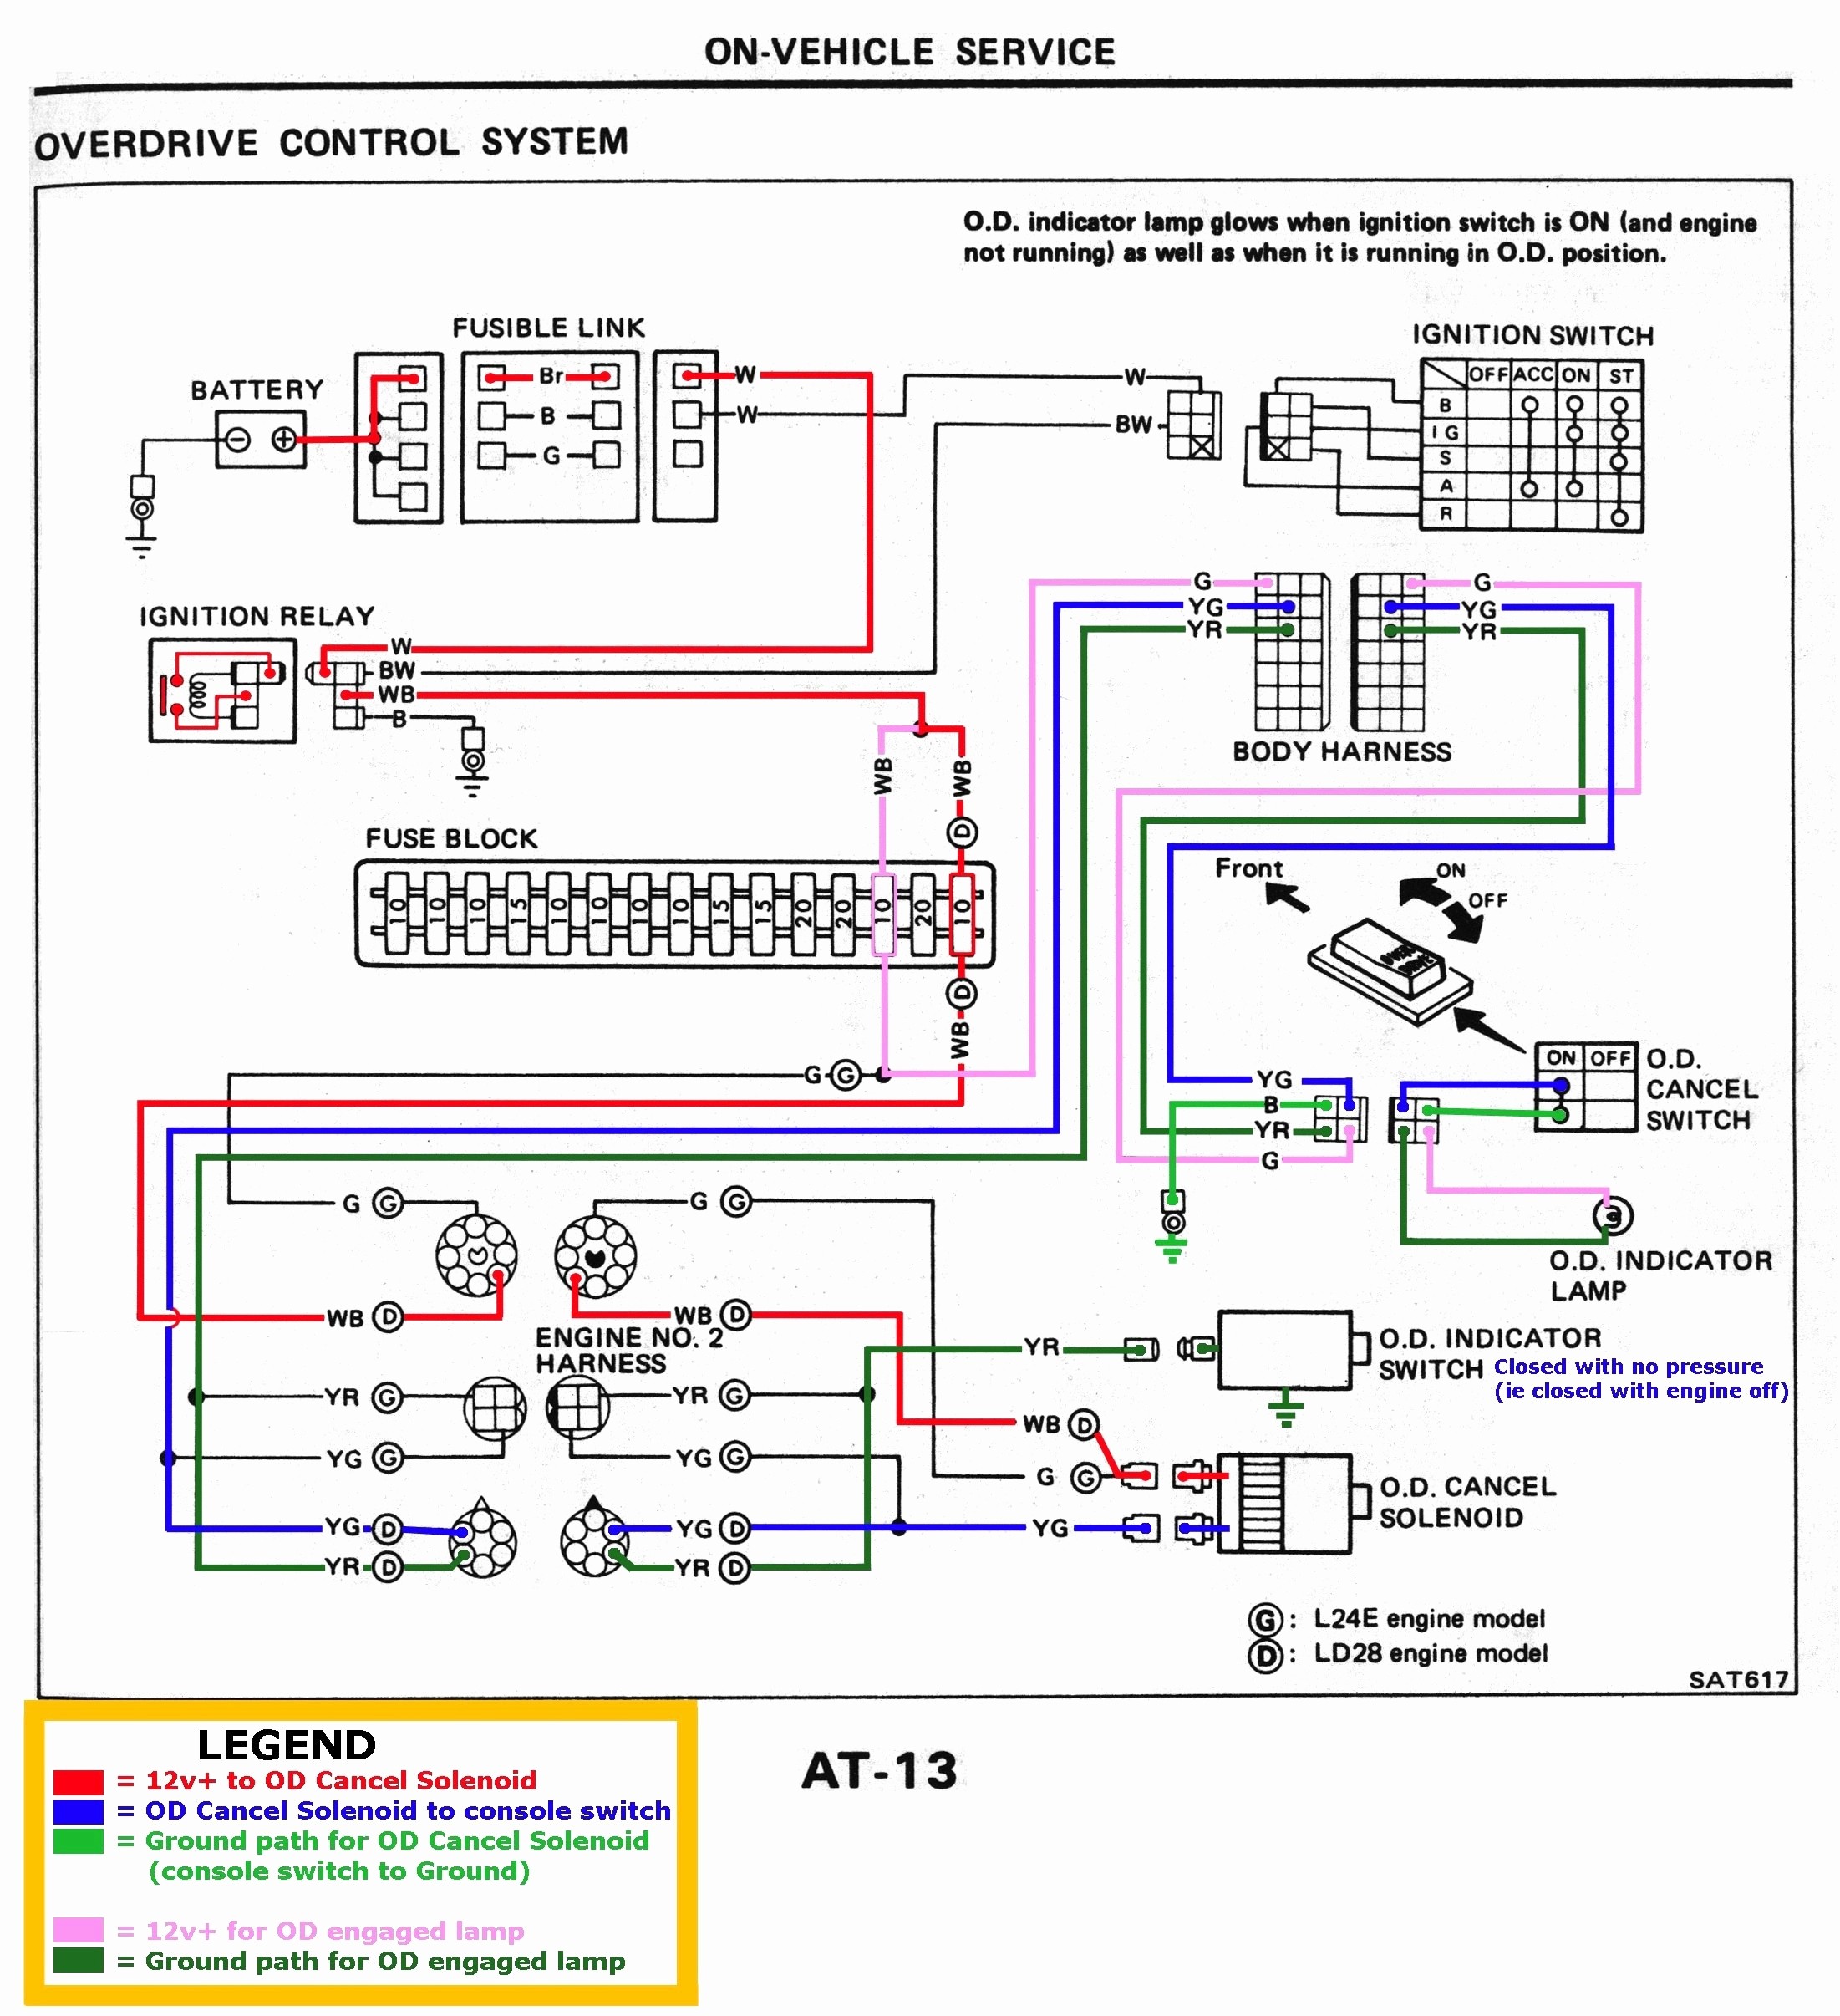 Wet Switch Wiring Diagram Elegant Wiring Diagram for Air Pressor Pressure Switch New Square D Air